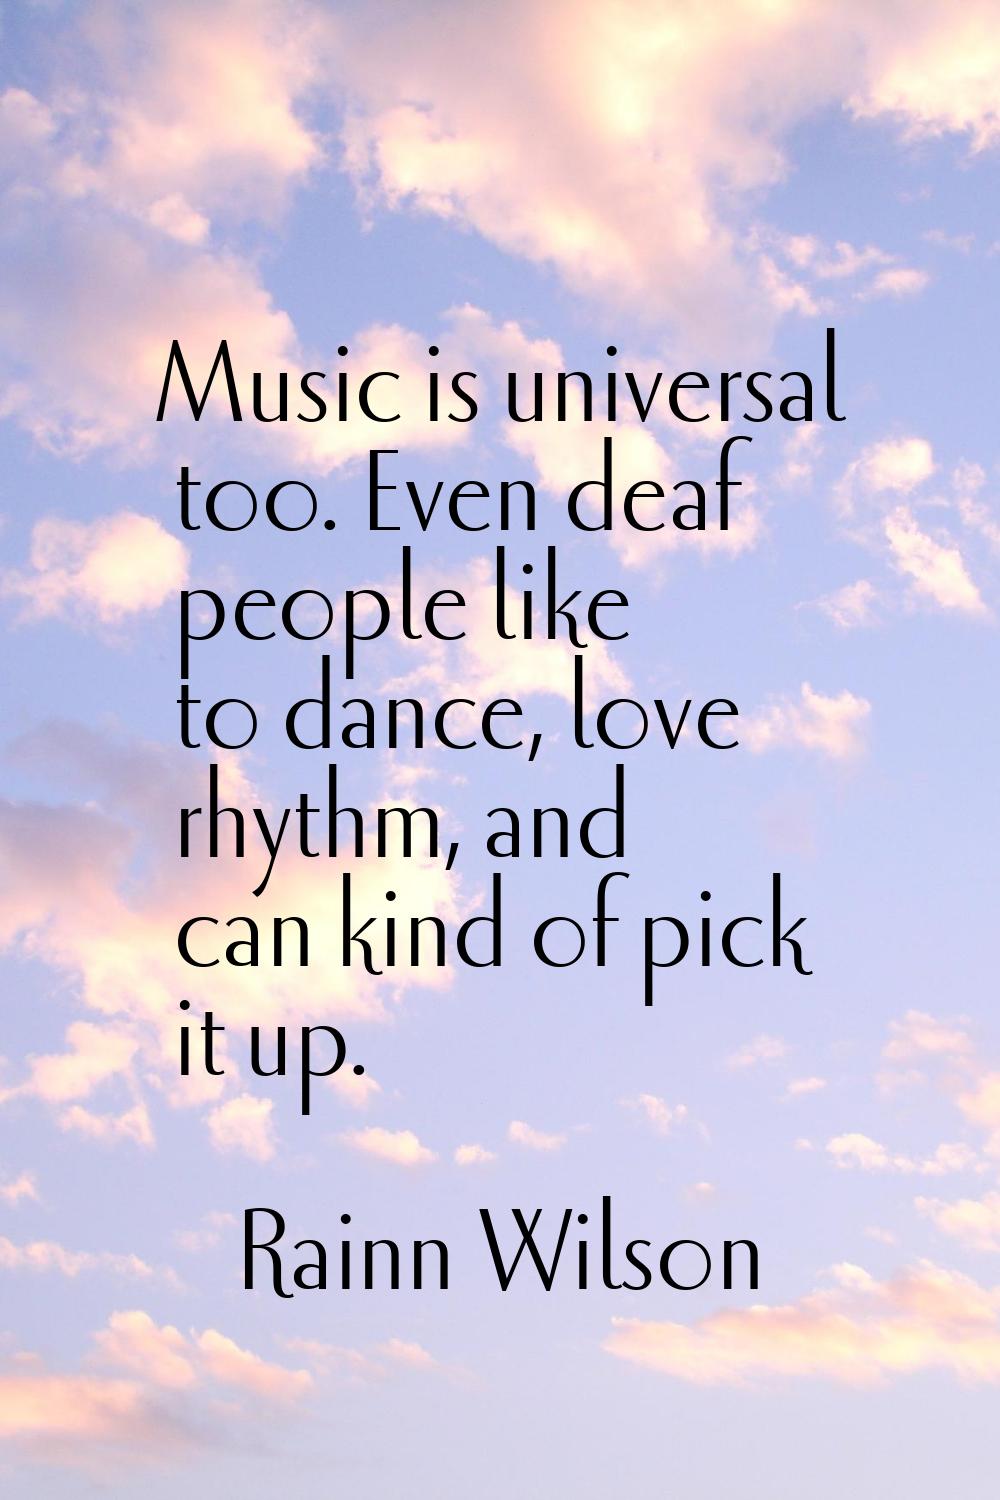 Music is universal too. Even deaf people like to dance, love rhythm, and can kind of pick it up.